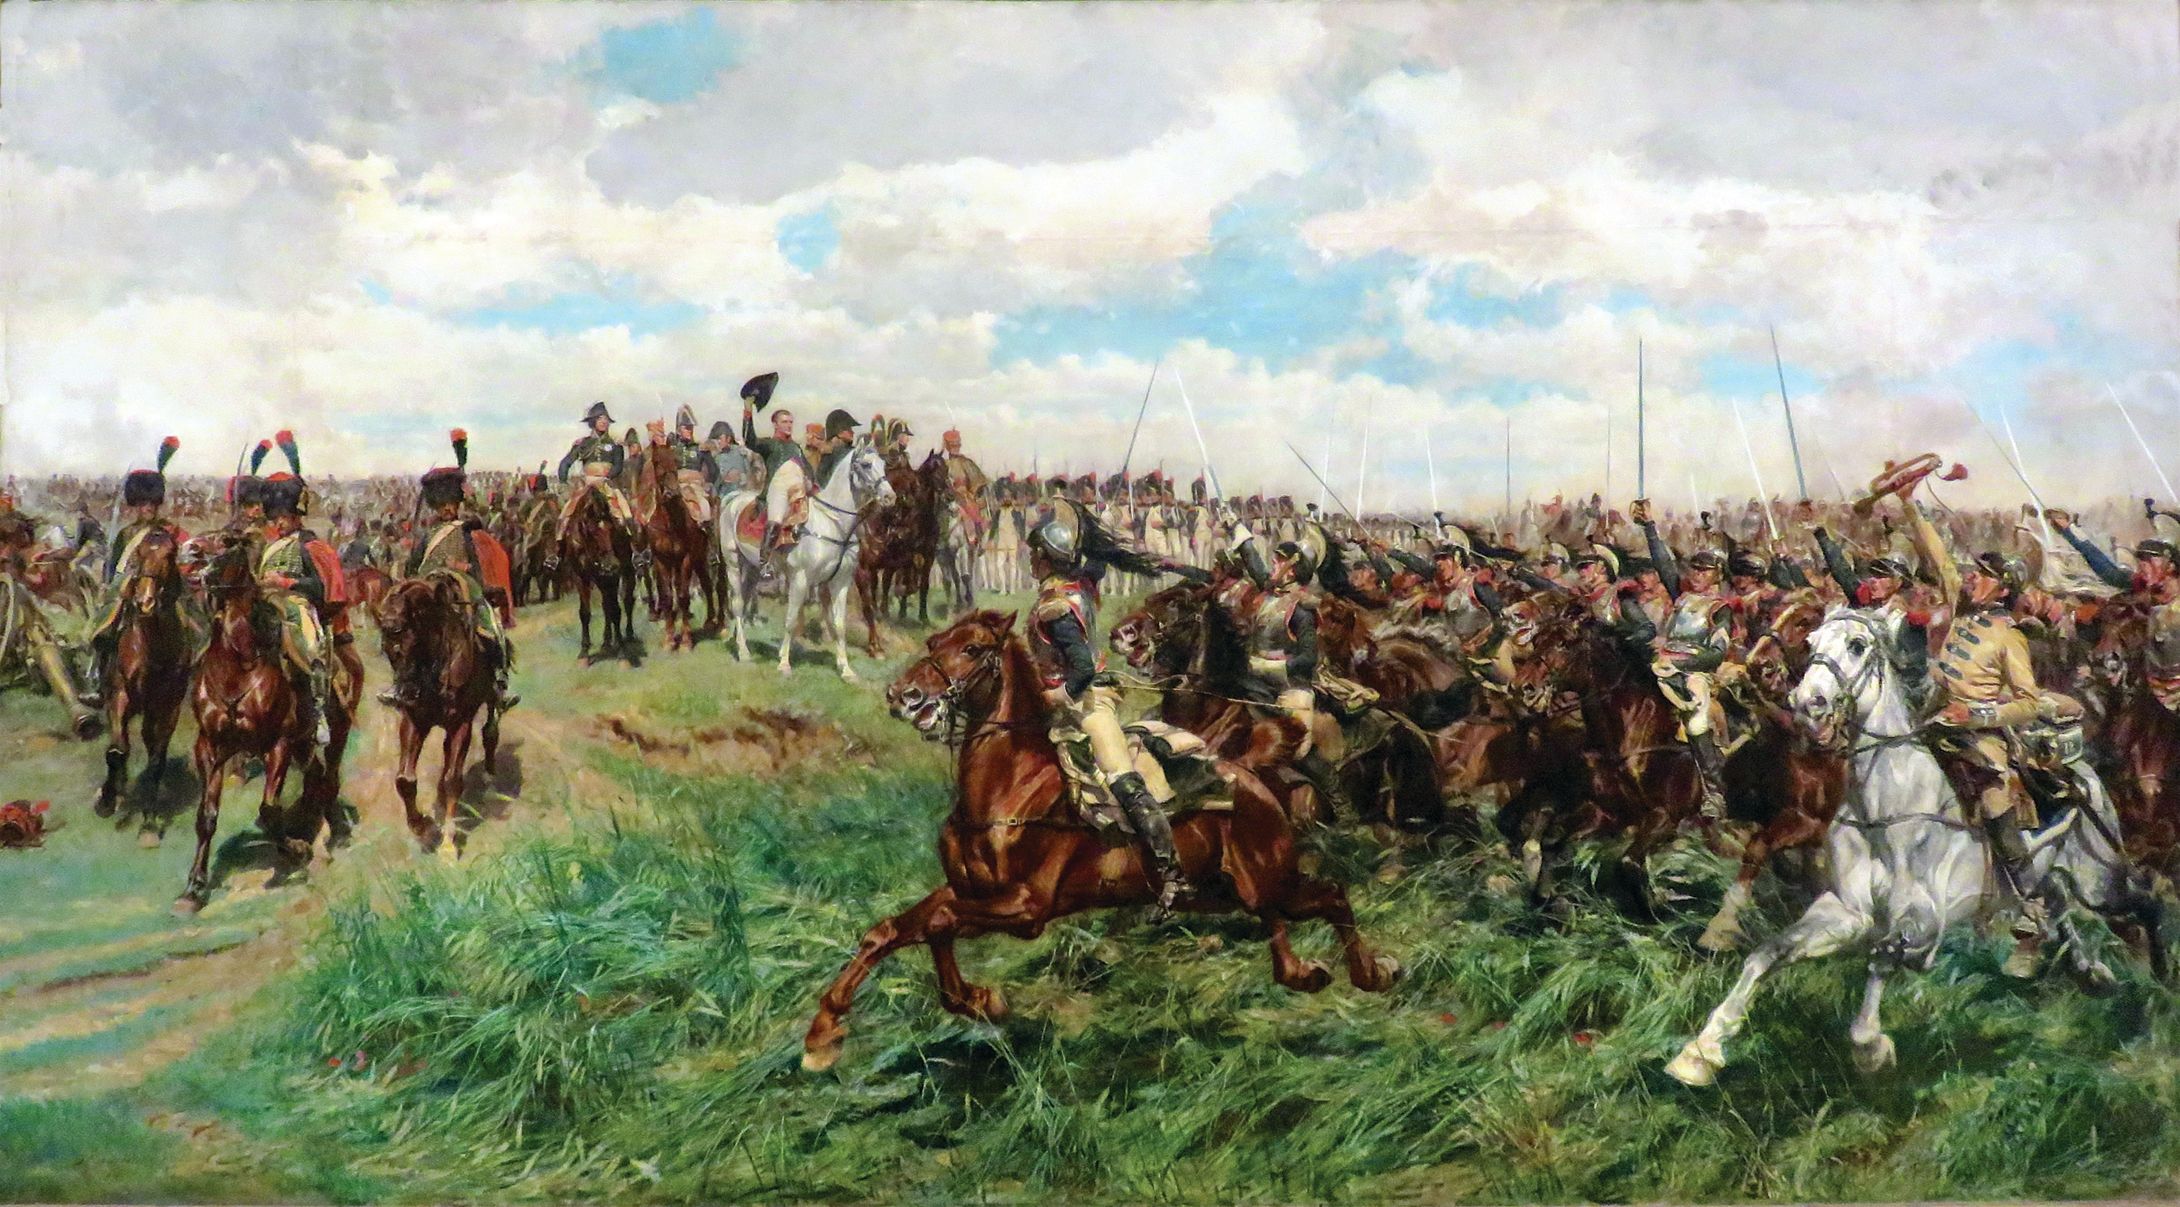 Emperor Napoleon salutes his 12th Cuirassier Regiment as they charge the Russians.